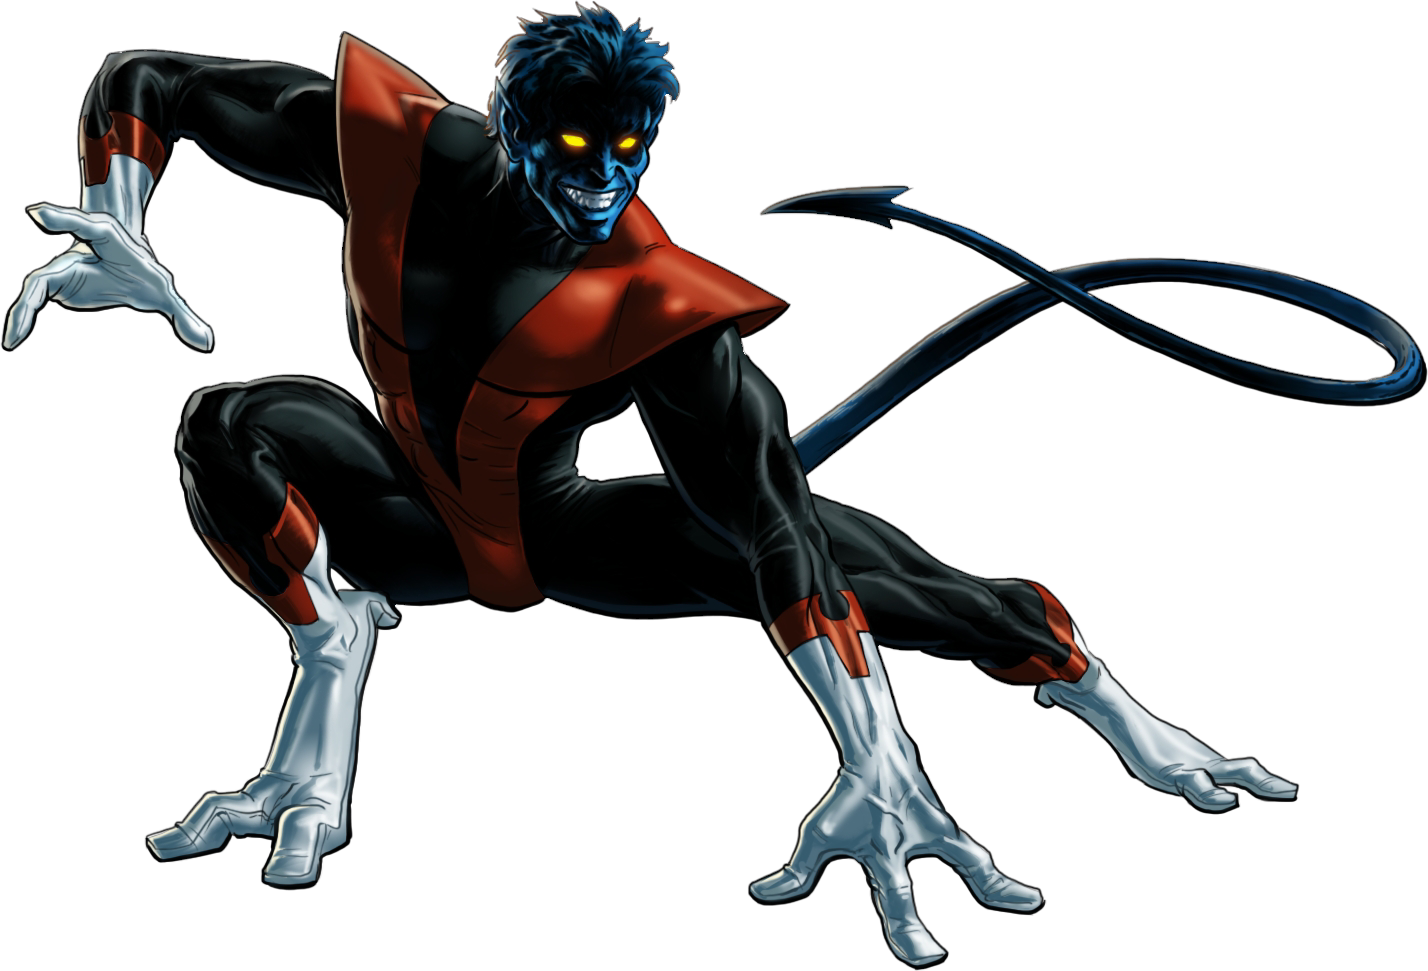 https://static.wikia.nocookie.net/vsbattles/images/9/90/Nightcrawler.png/revision/latest?cb=20150614203504